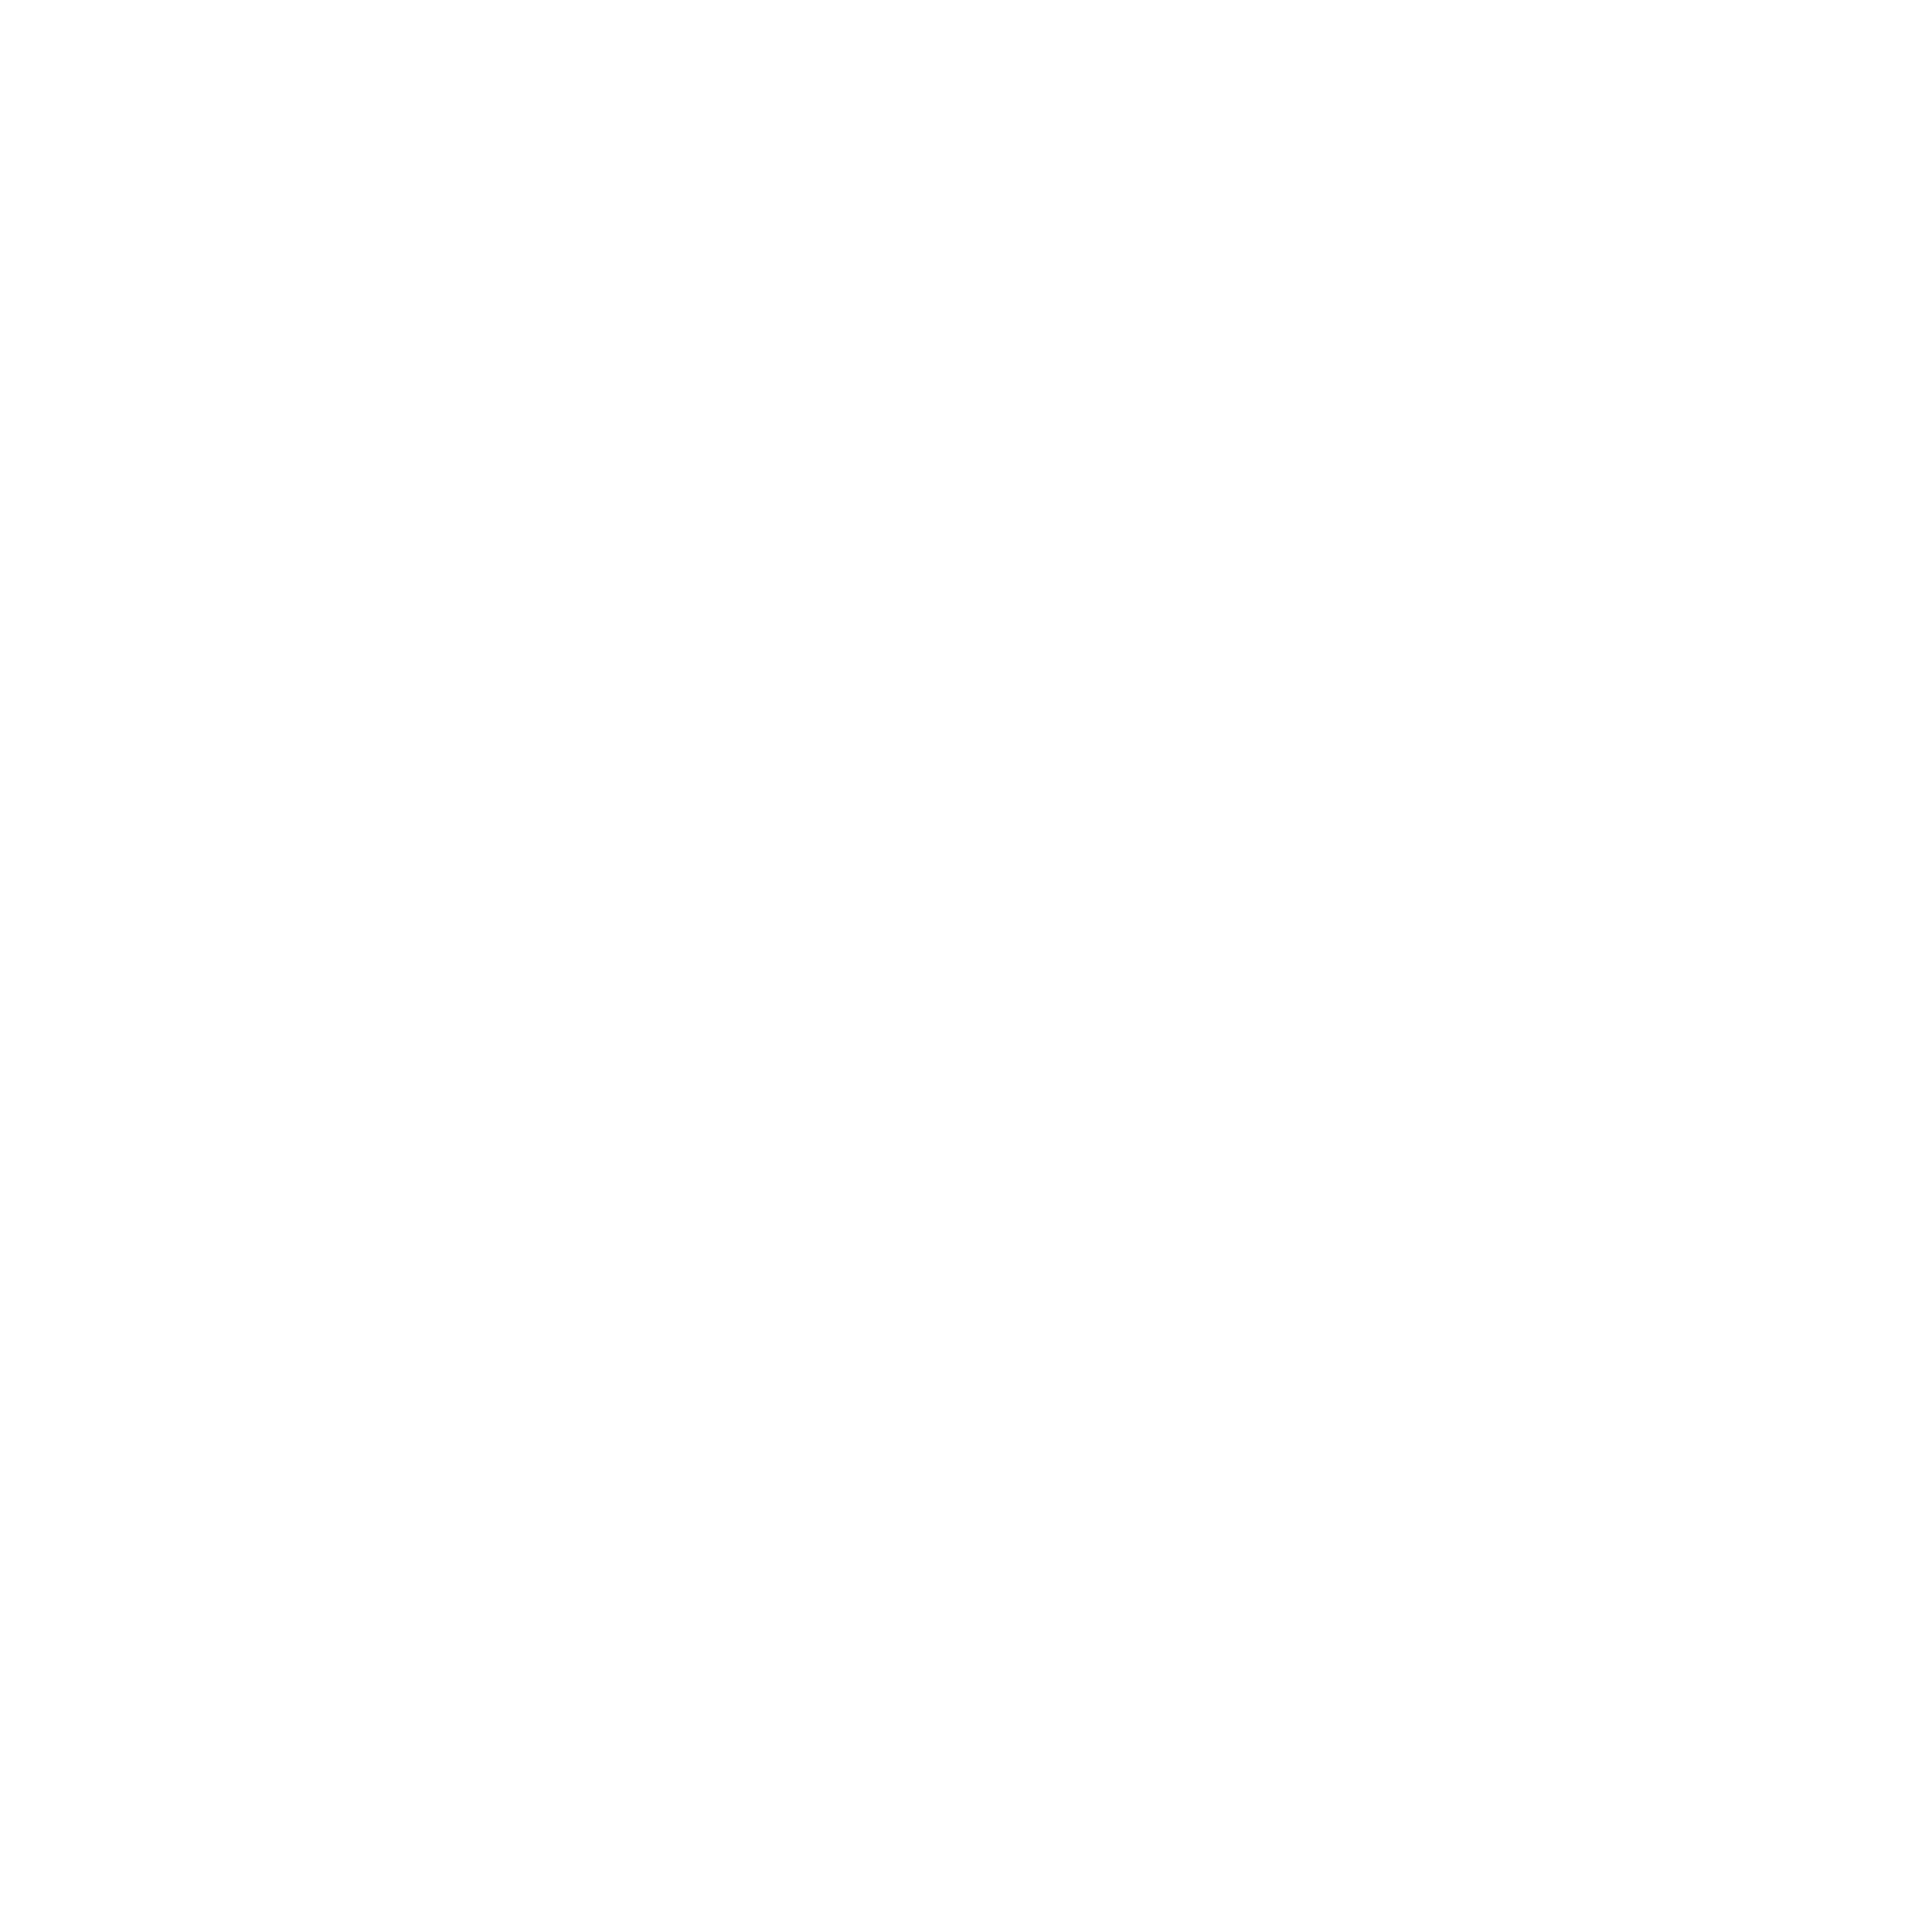 A Black Letter In A White Circle